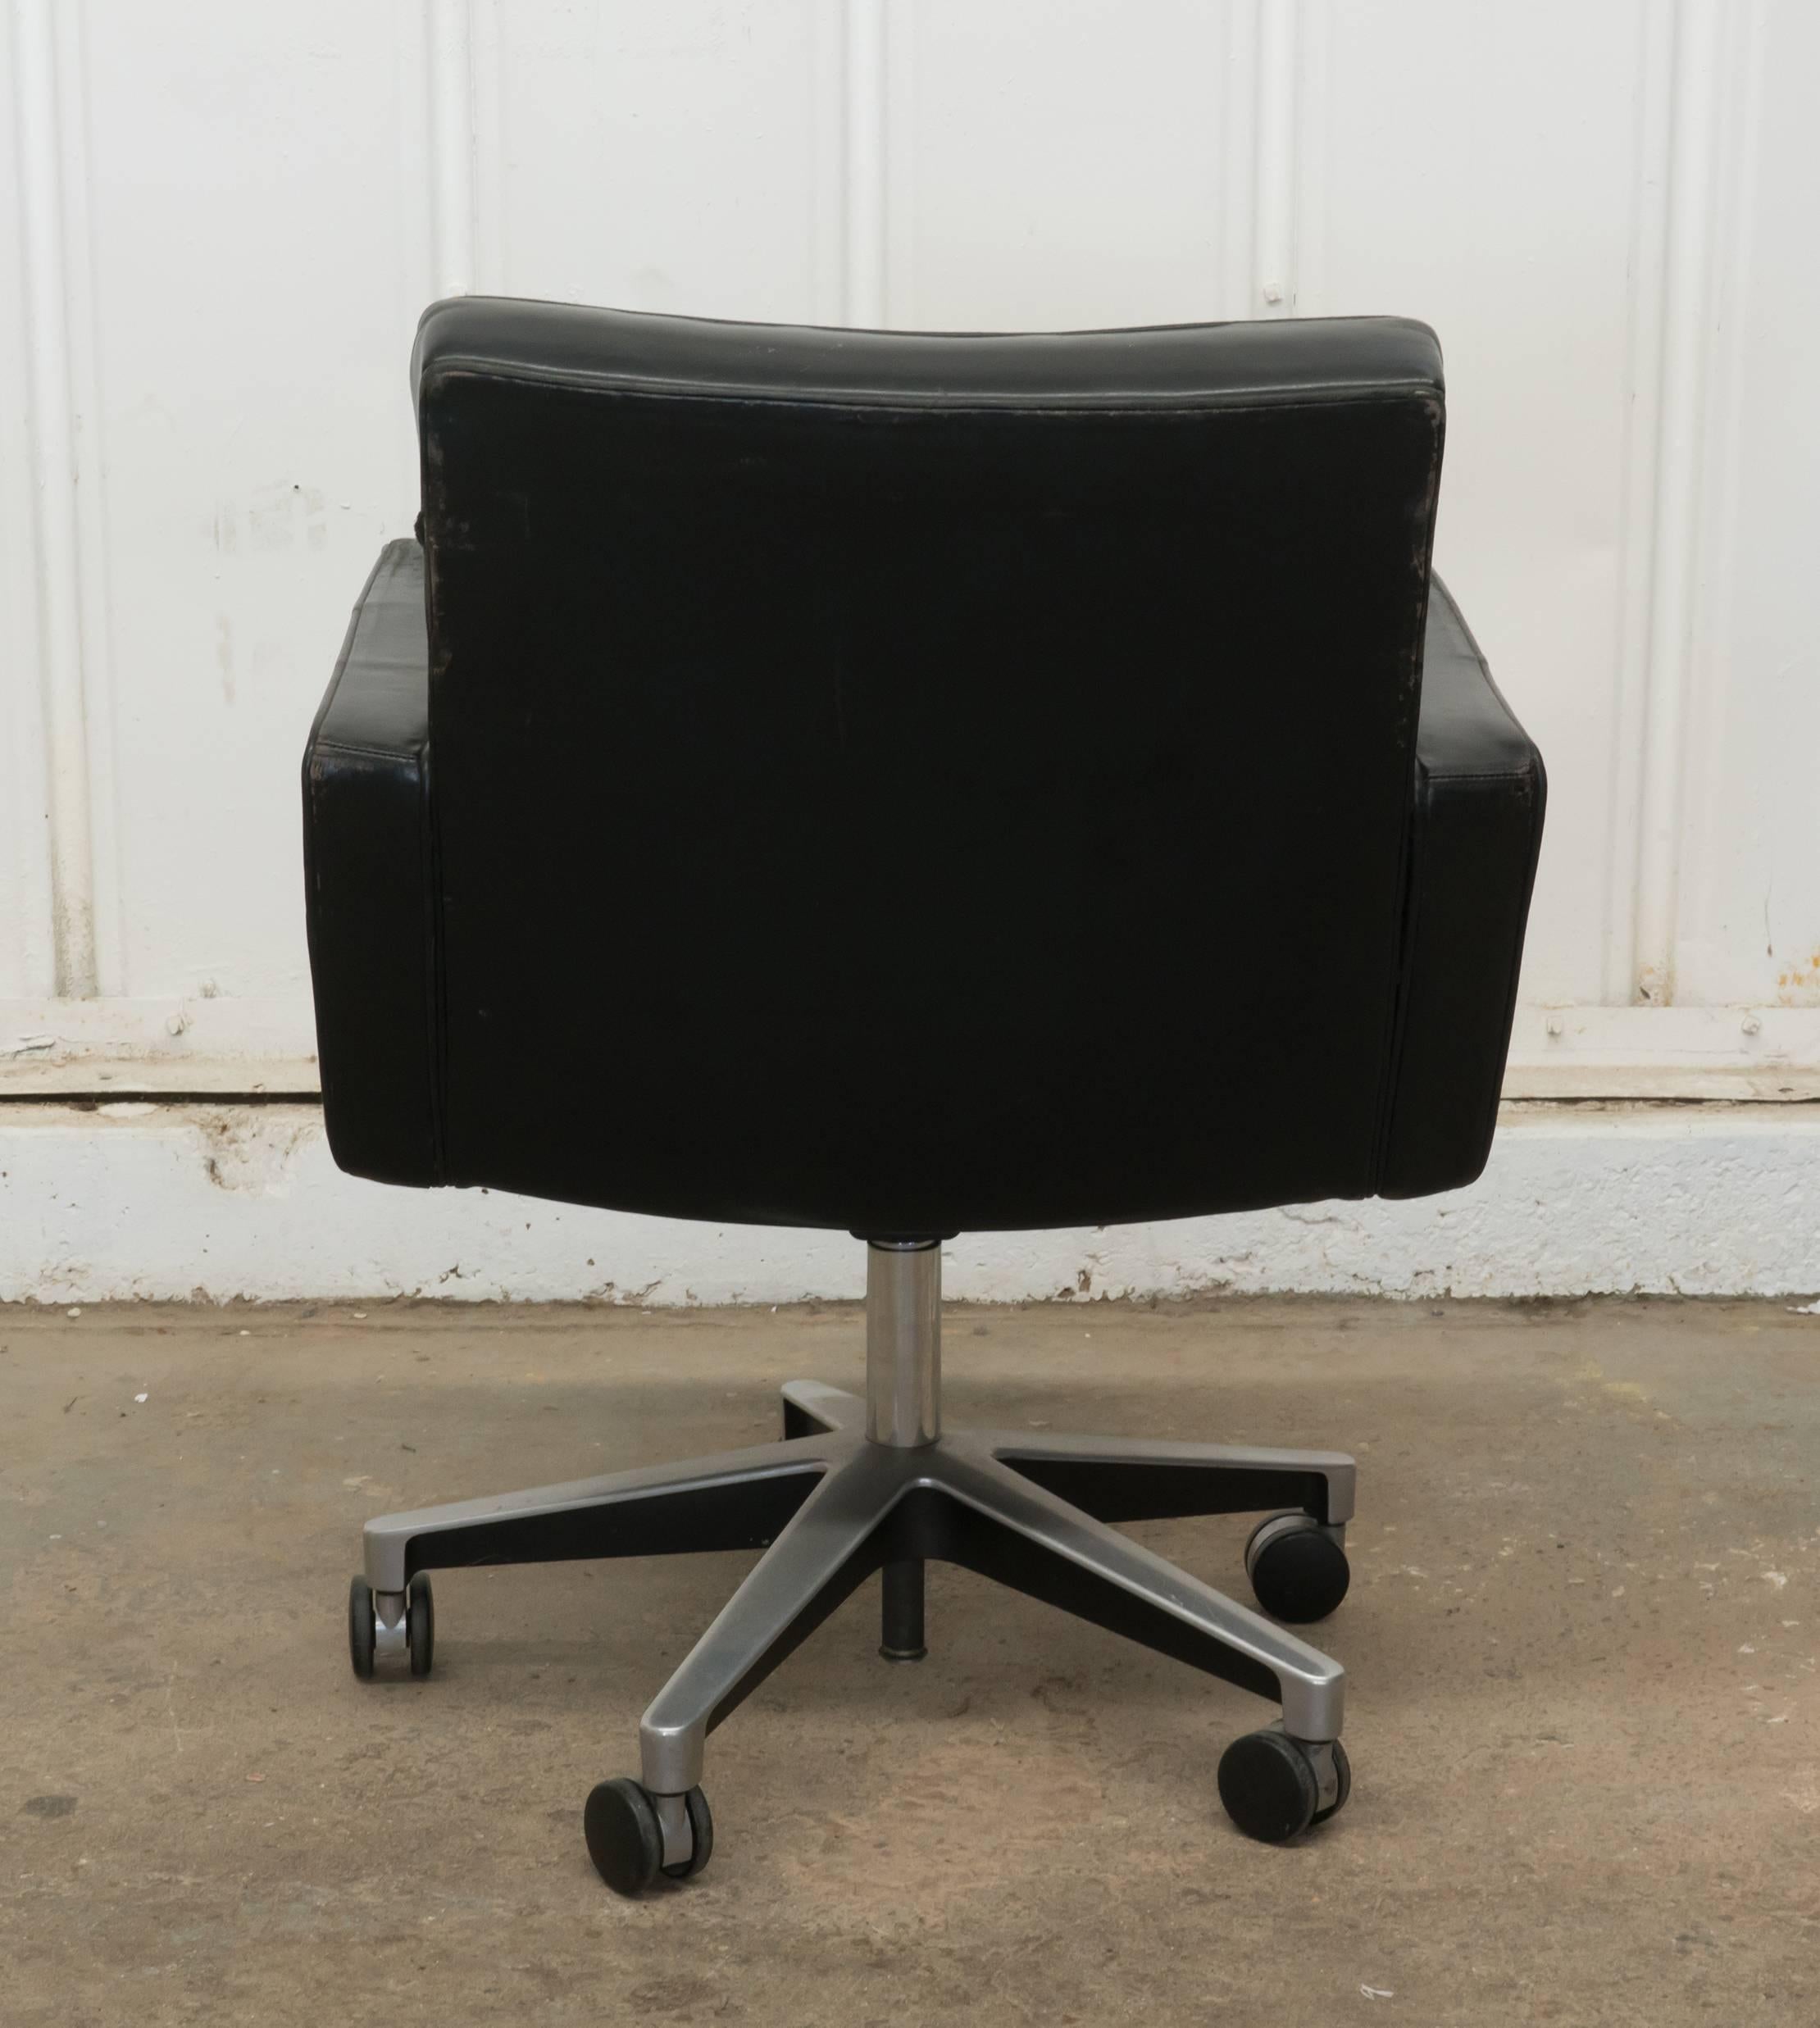 Vintage Vincent Cafiero for knoll swivel desk armchair in black leather with a brushed chrome base, circa 1970. Great condition, with nicely broken-in leather.